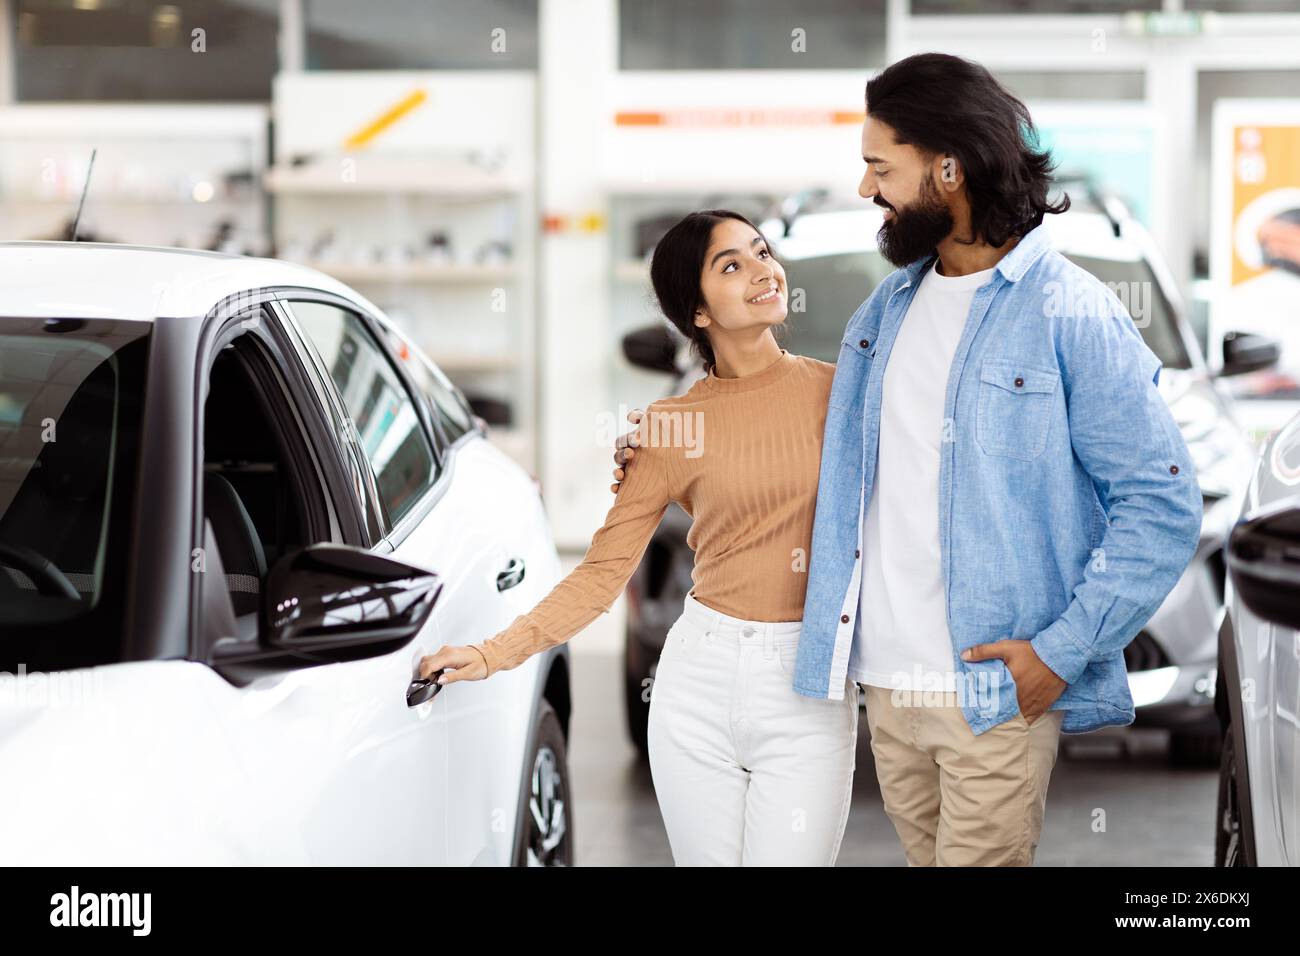 Man and Woman Standing Next to Car at Showroom Stock Photo